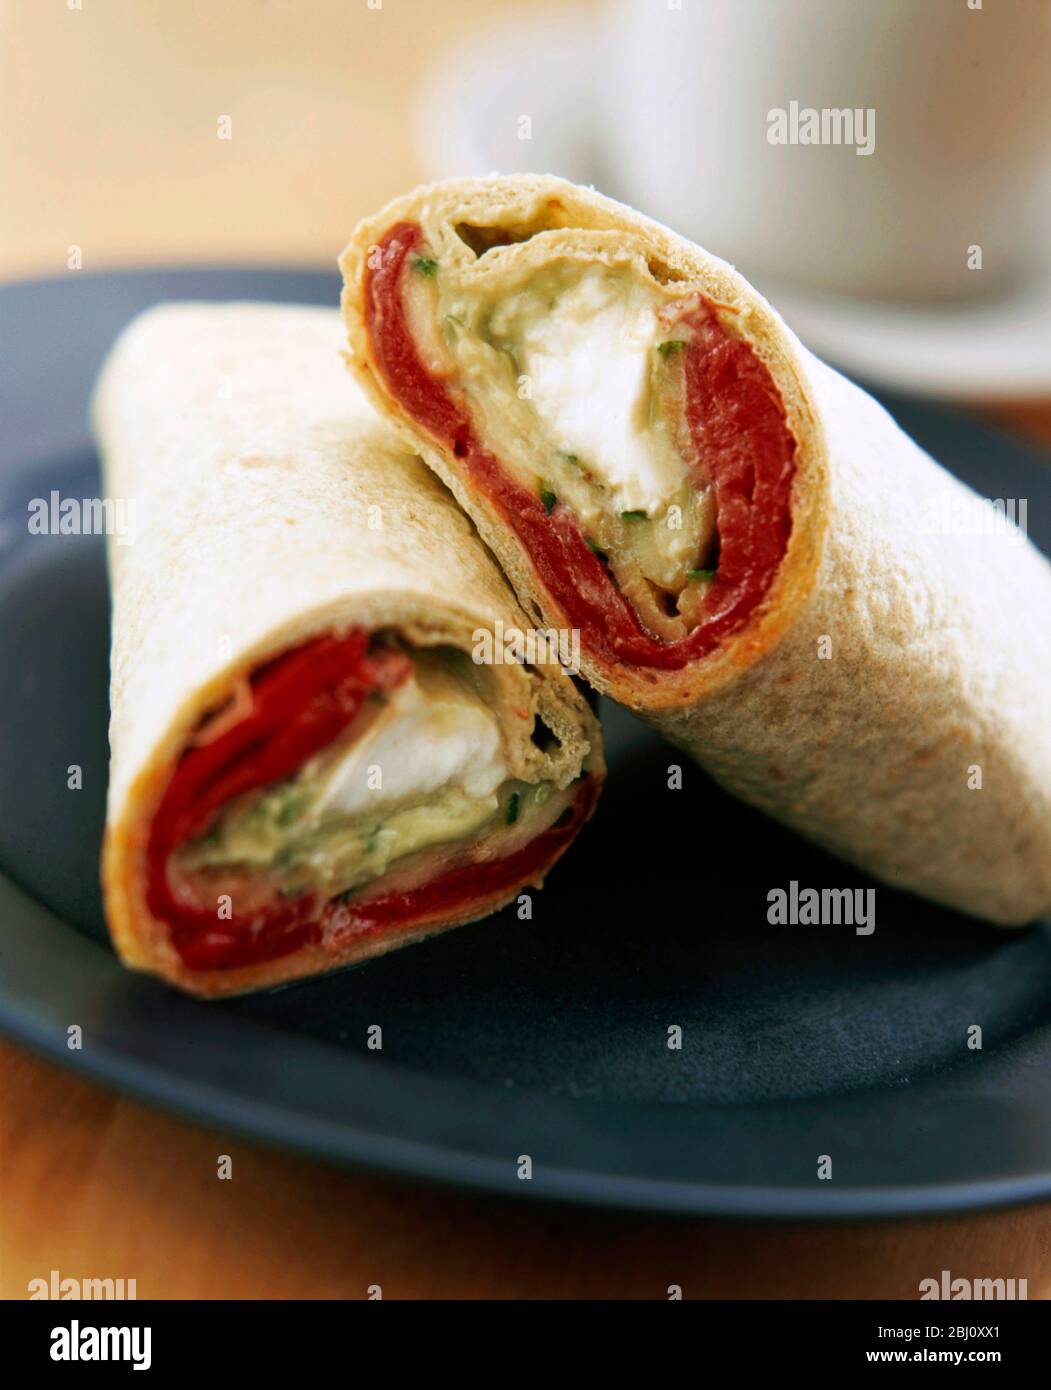 Wrap sandwich cut in two arranged on black plate with cup and saucer behind - Stock Photo